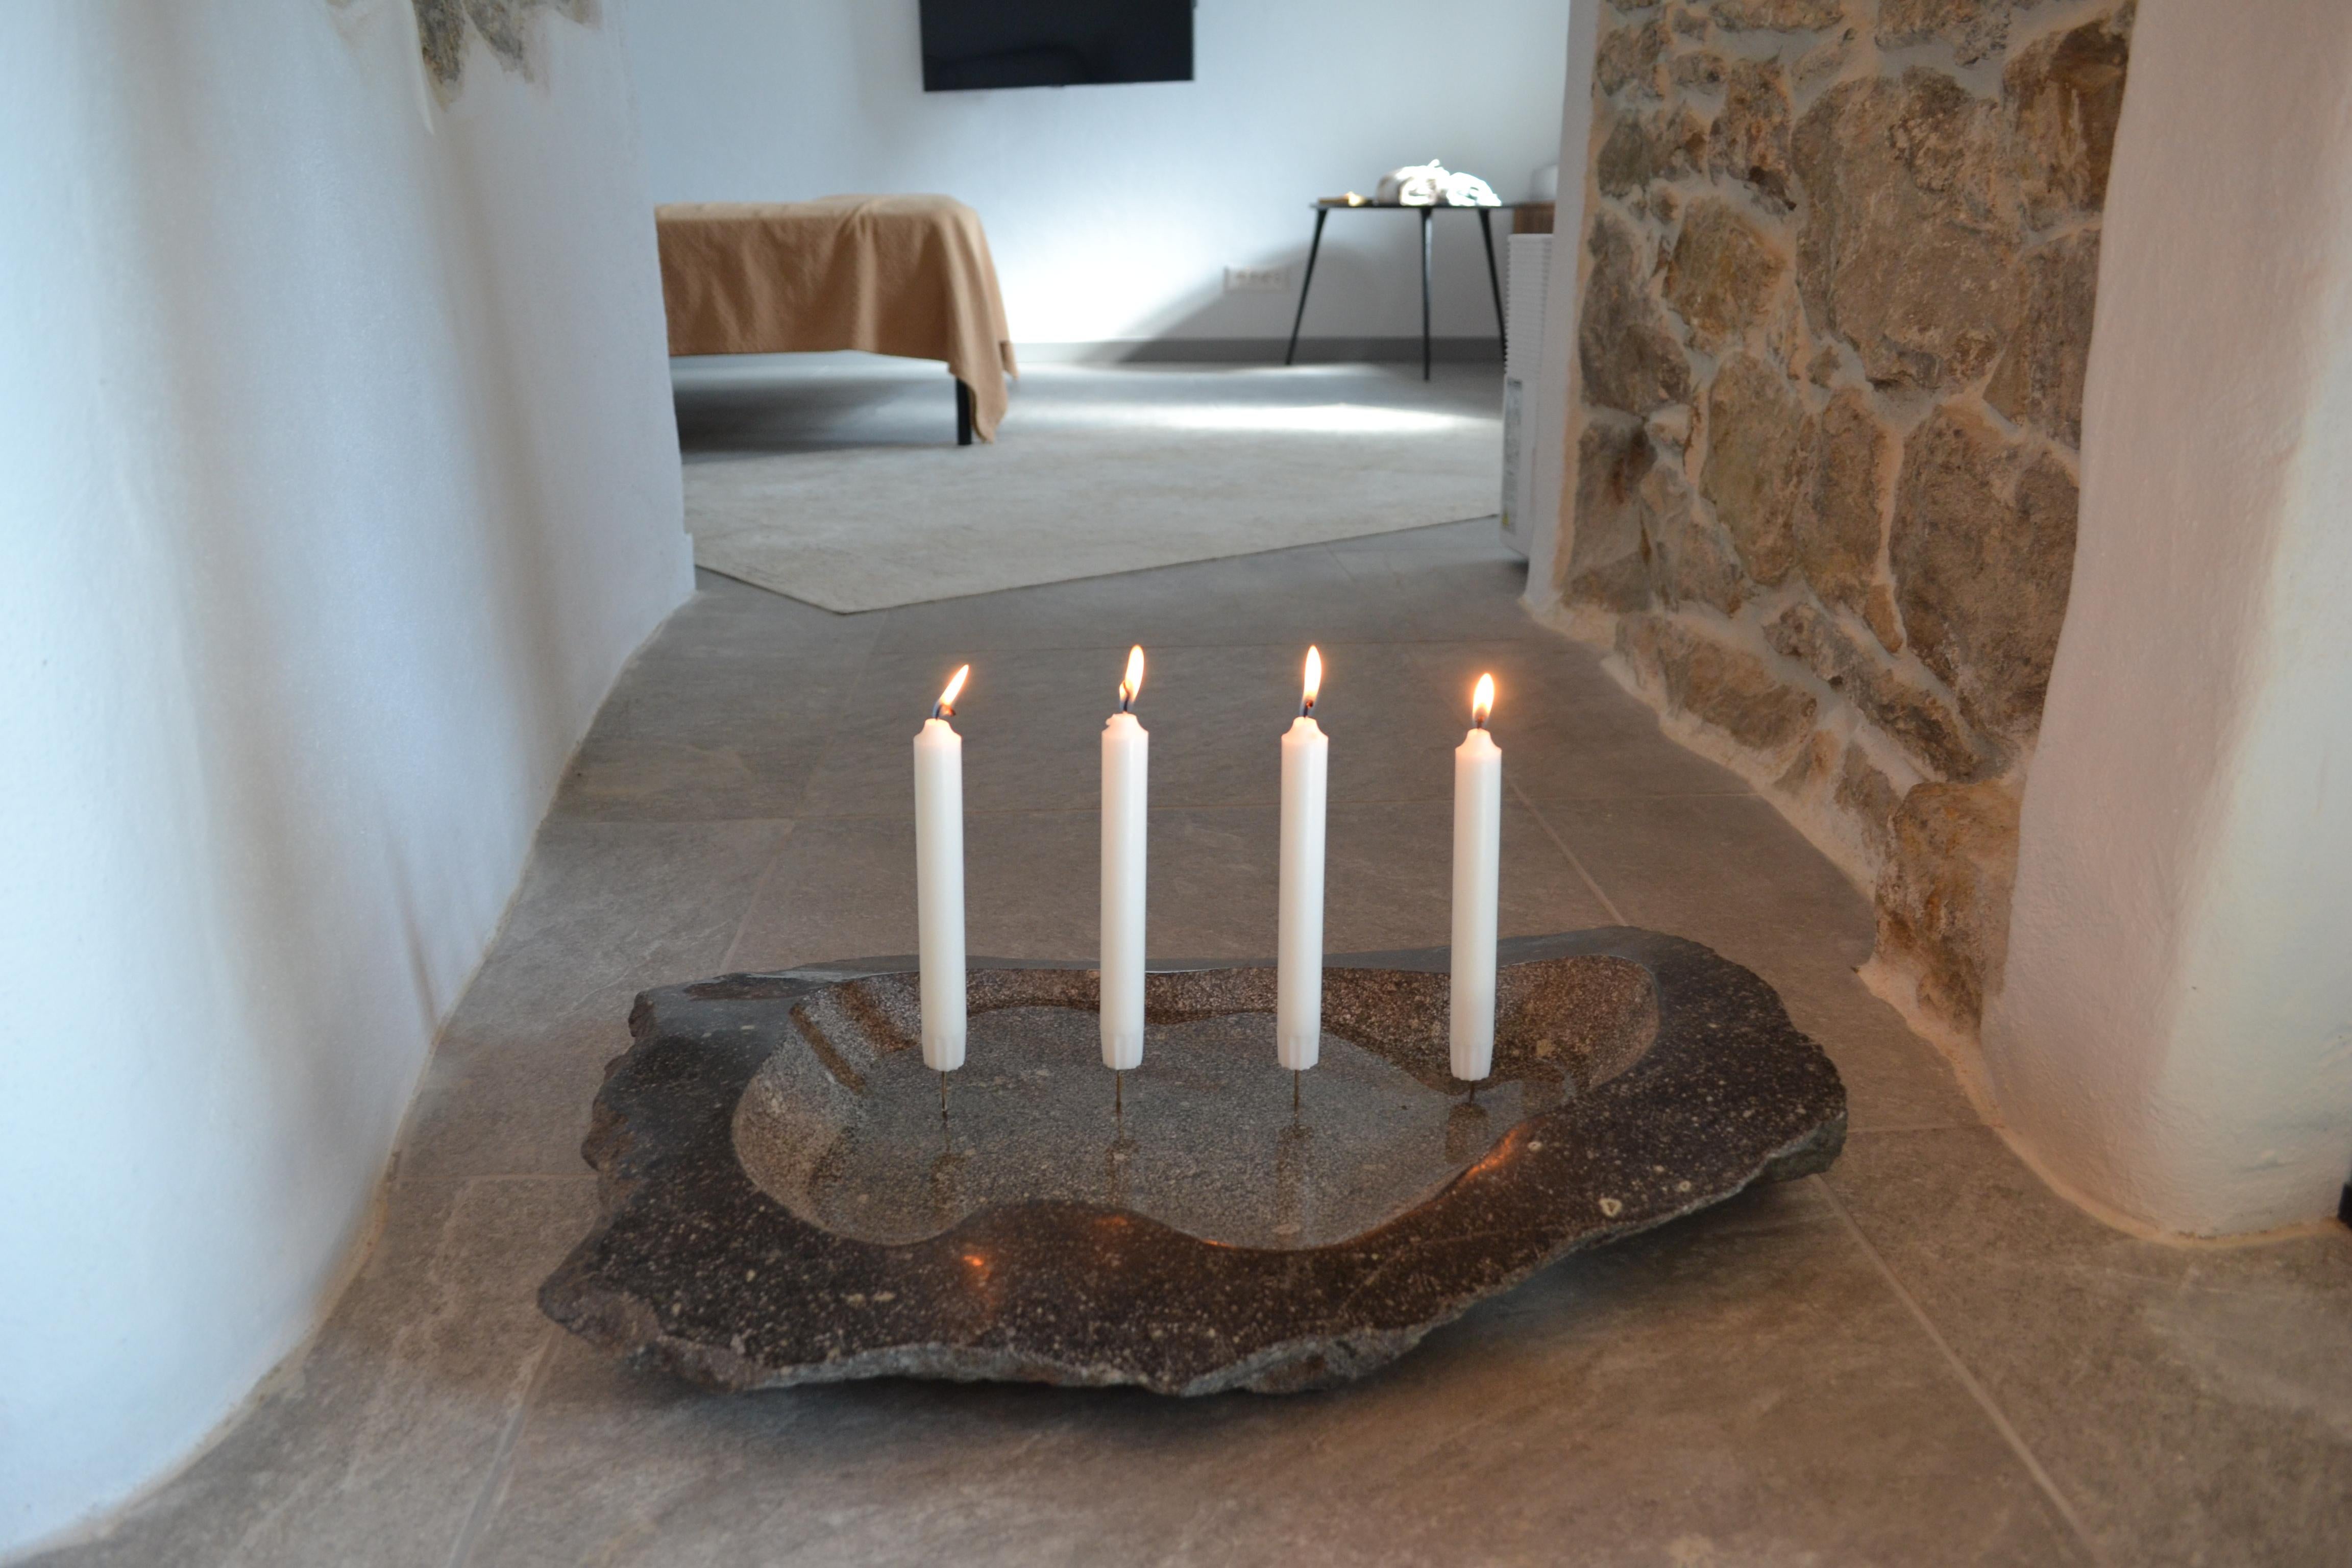 Fire and water. 
A Sculpted candelabra from granite (Rhyolite) stone that can be filled with water.
The objects invites for peaceful contemplation and meditation. 
A single block of granite has been carved in an organic shape to be filled up with